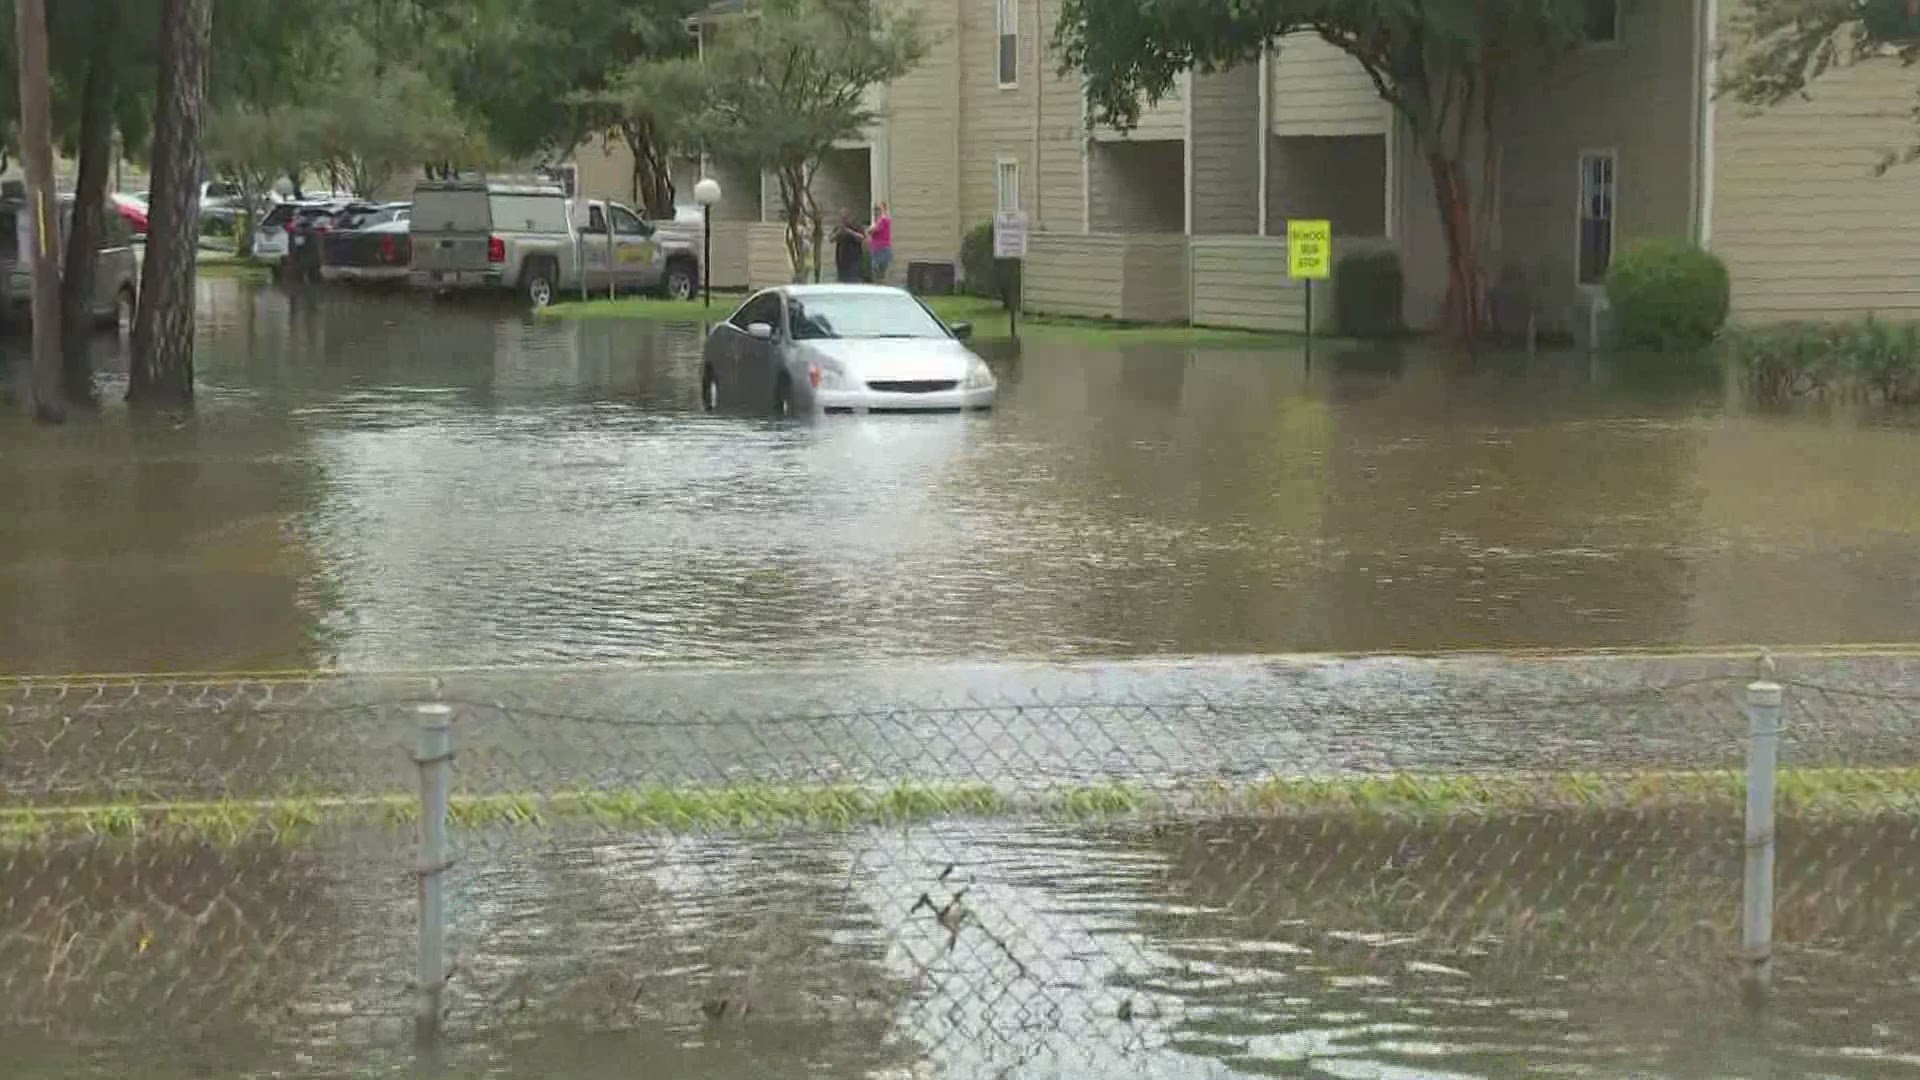 Some places in Mandeville had more than 7 inches of rain overnight, causing street flooding and some to get into homes and cars.